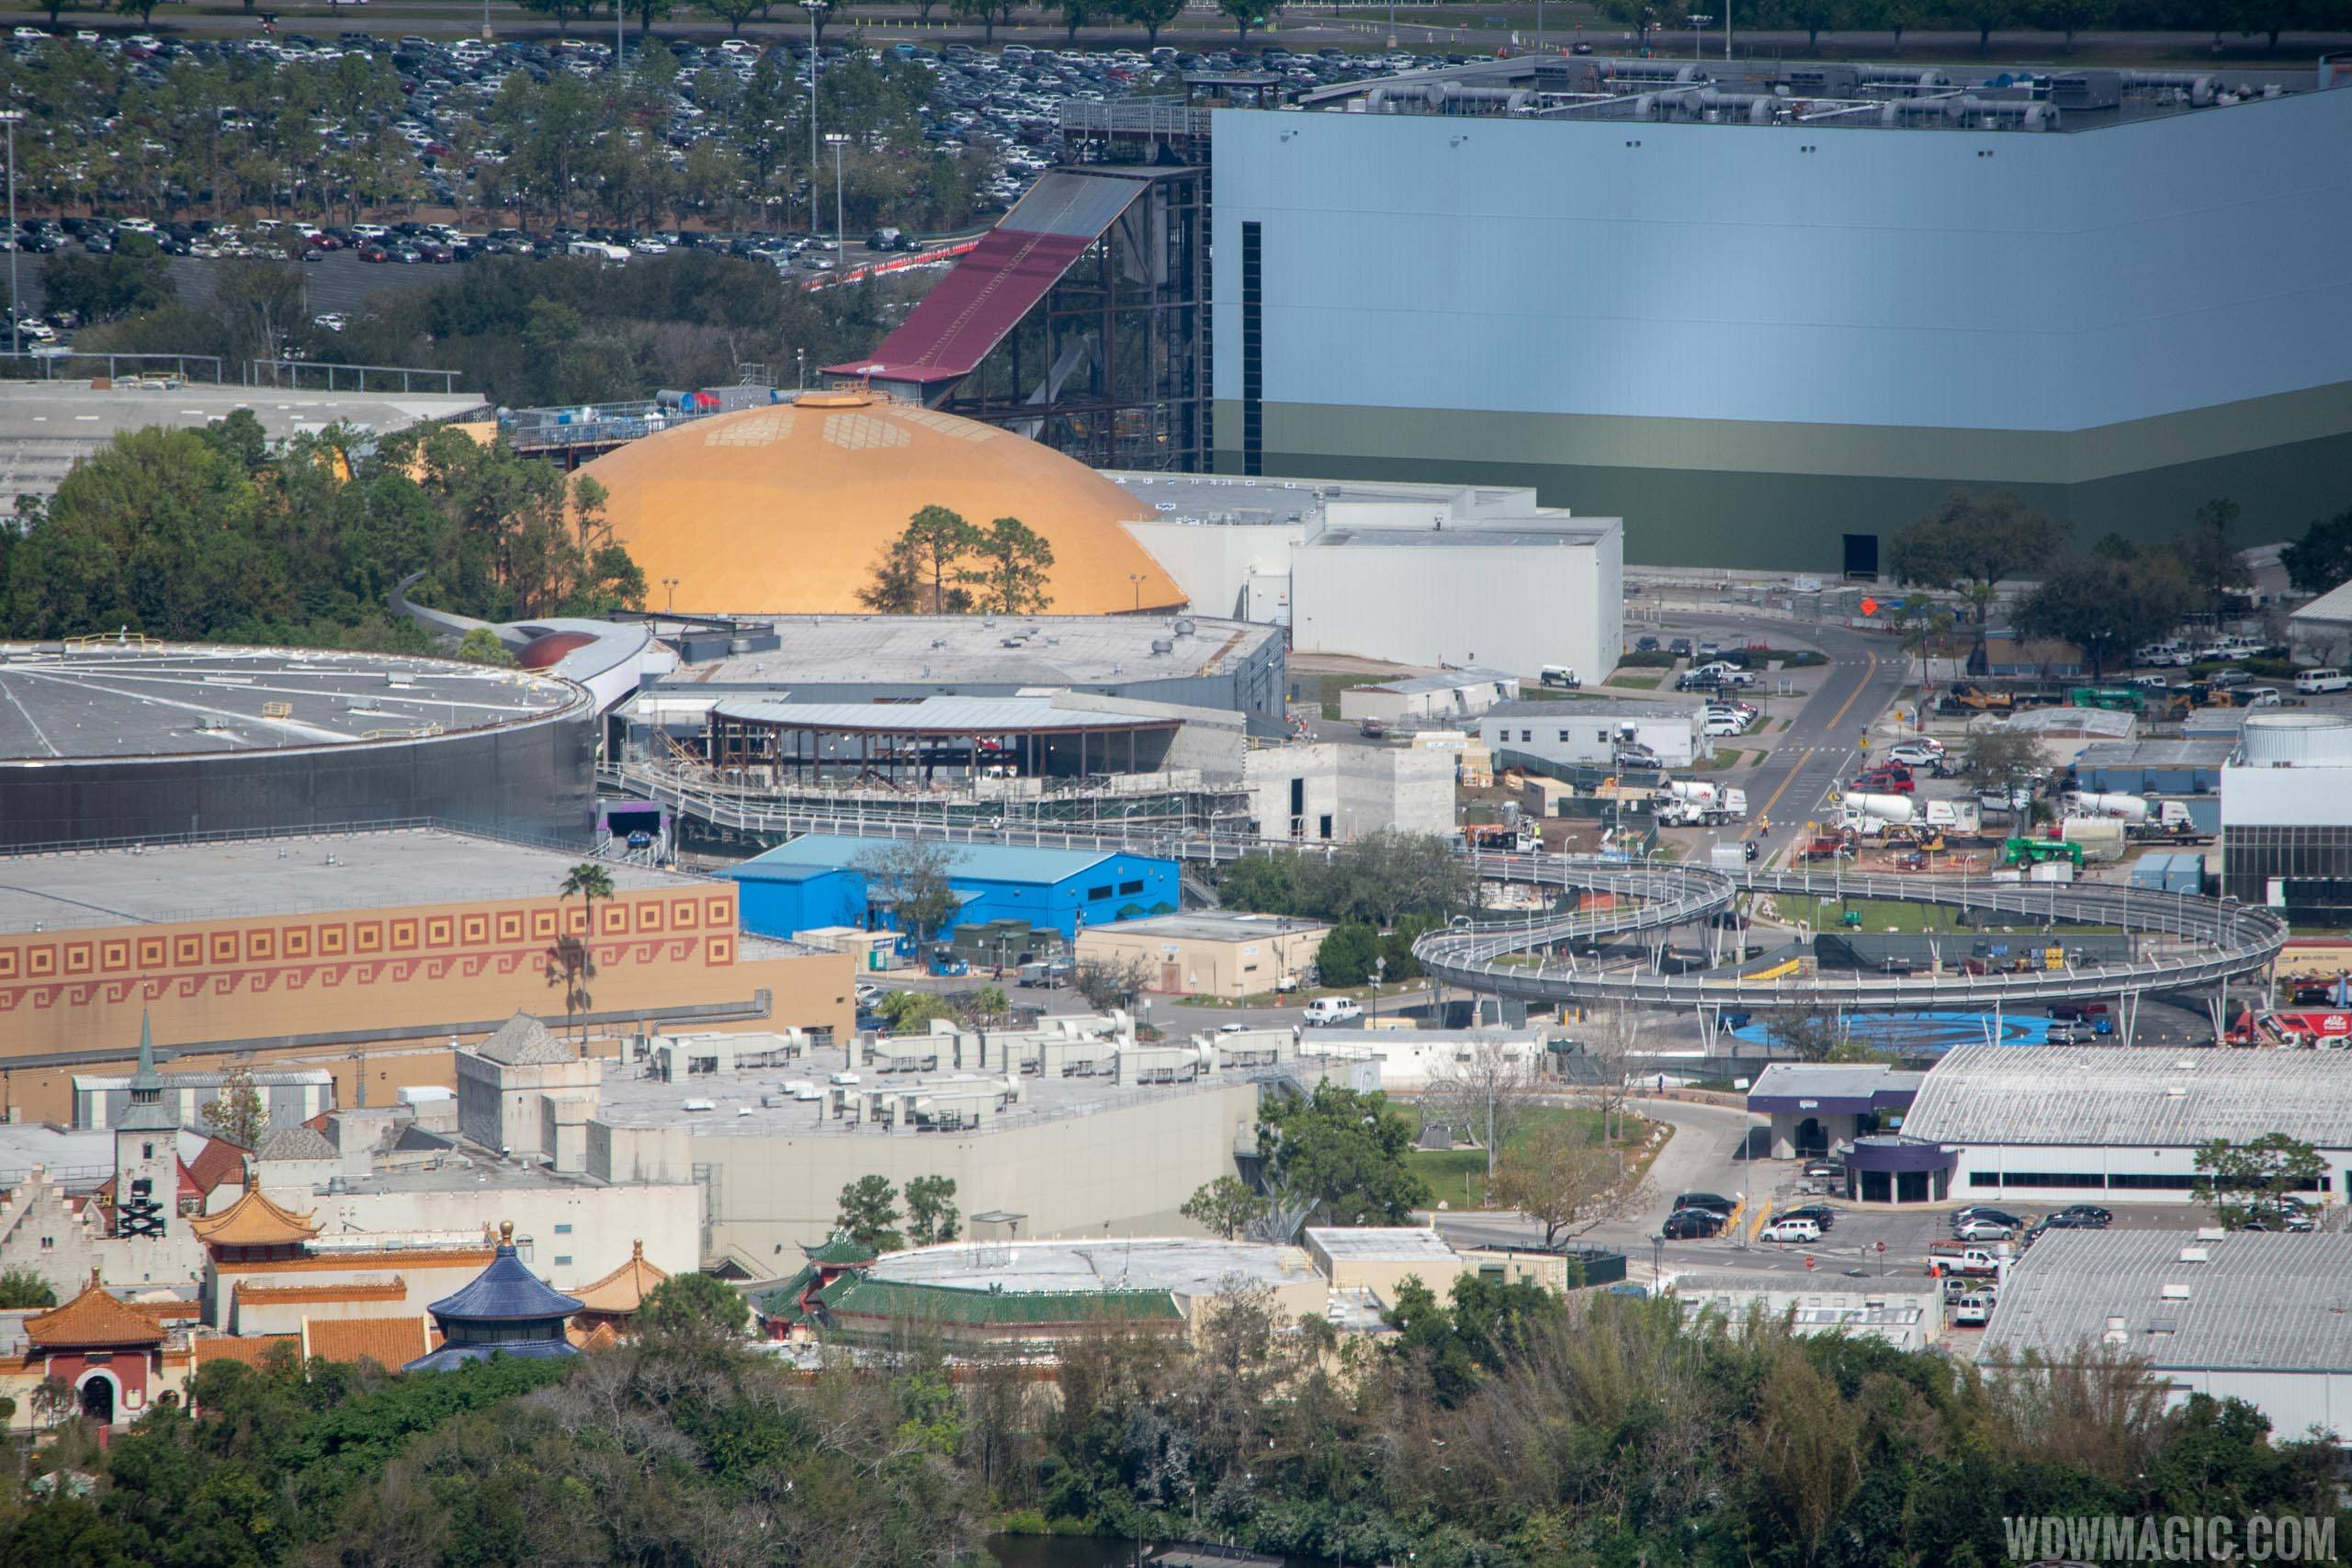 Epcot Space Restaurant construction - February 2019